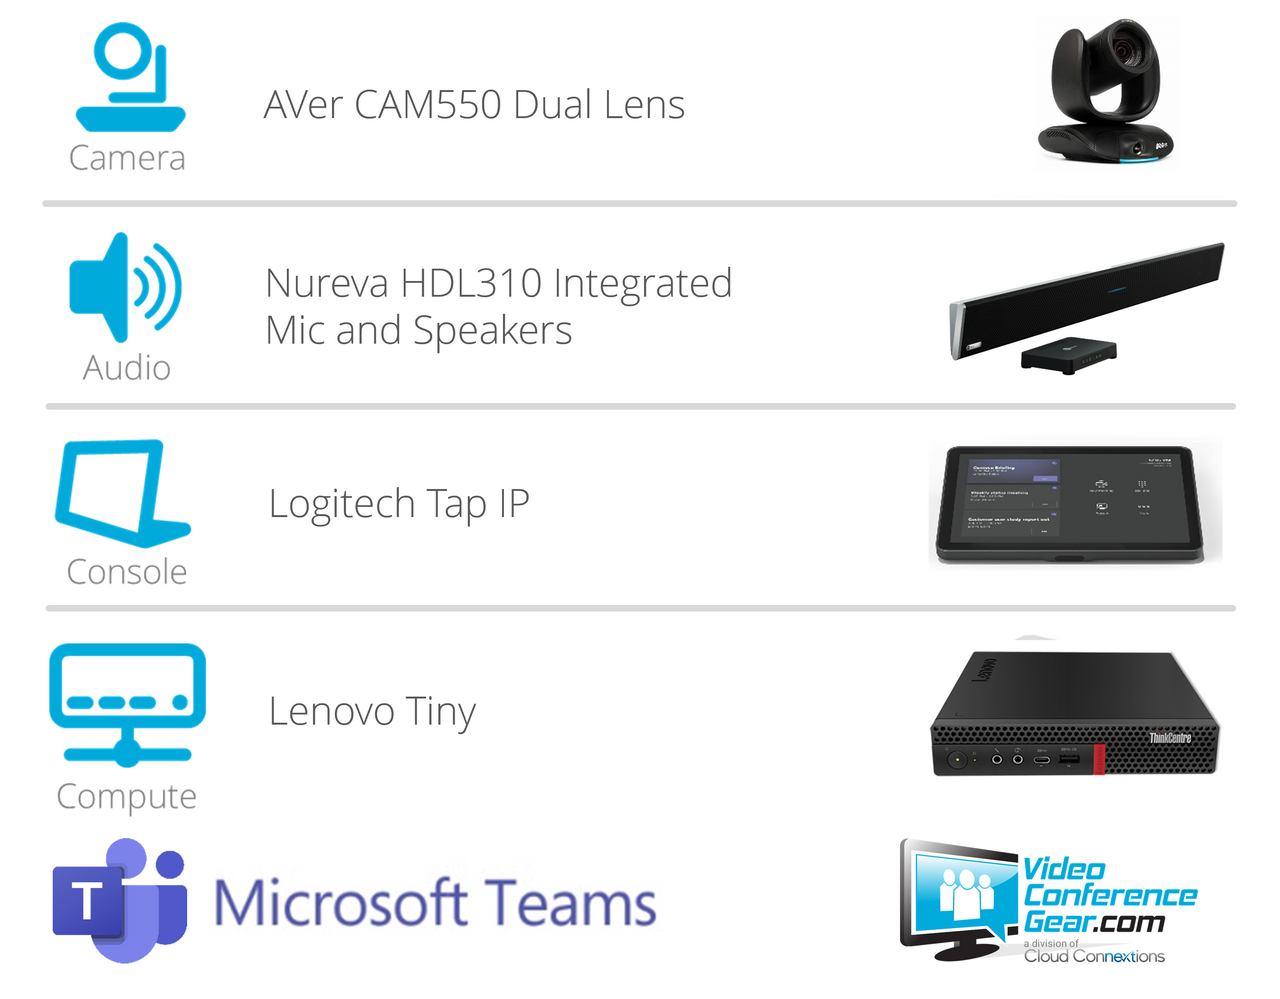 Microsoft Teams Rooms Solution with AVer CAM550 and Nureva HDL310 - Medium Room